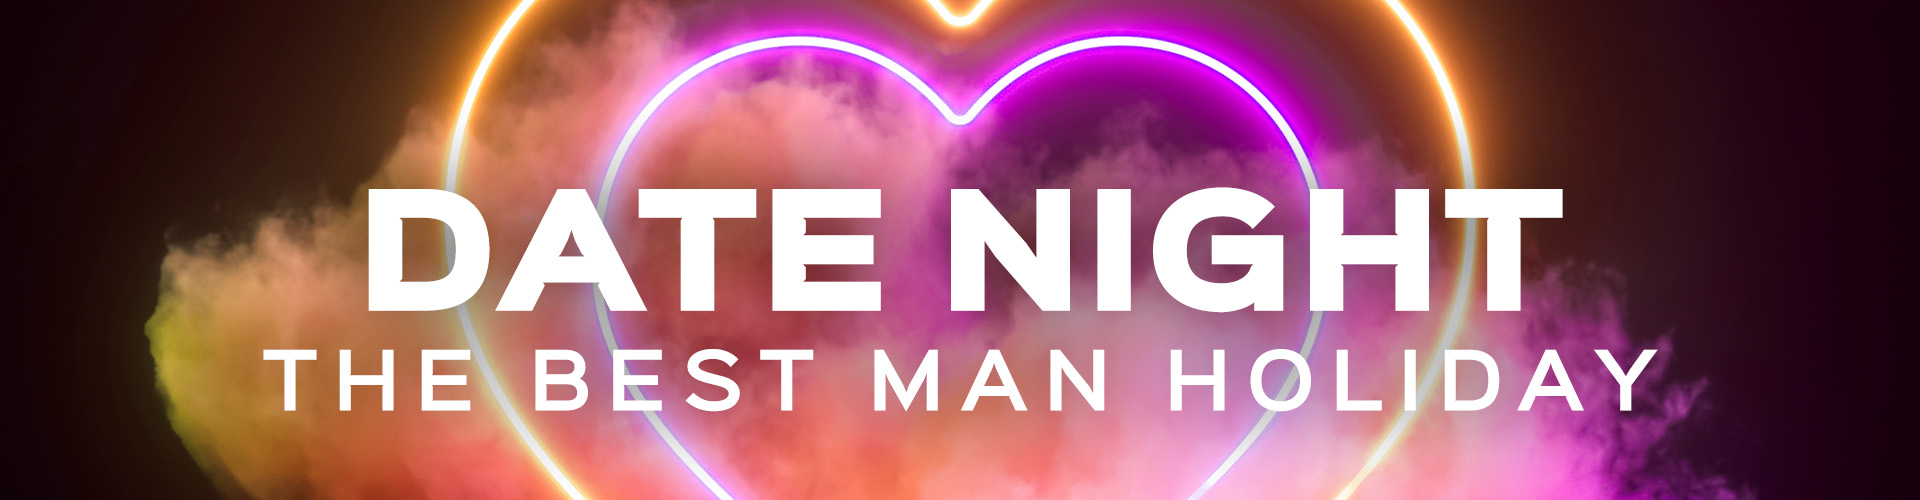 Date Night - The Best Man Holiday